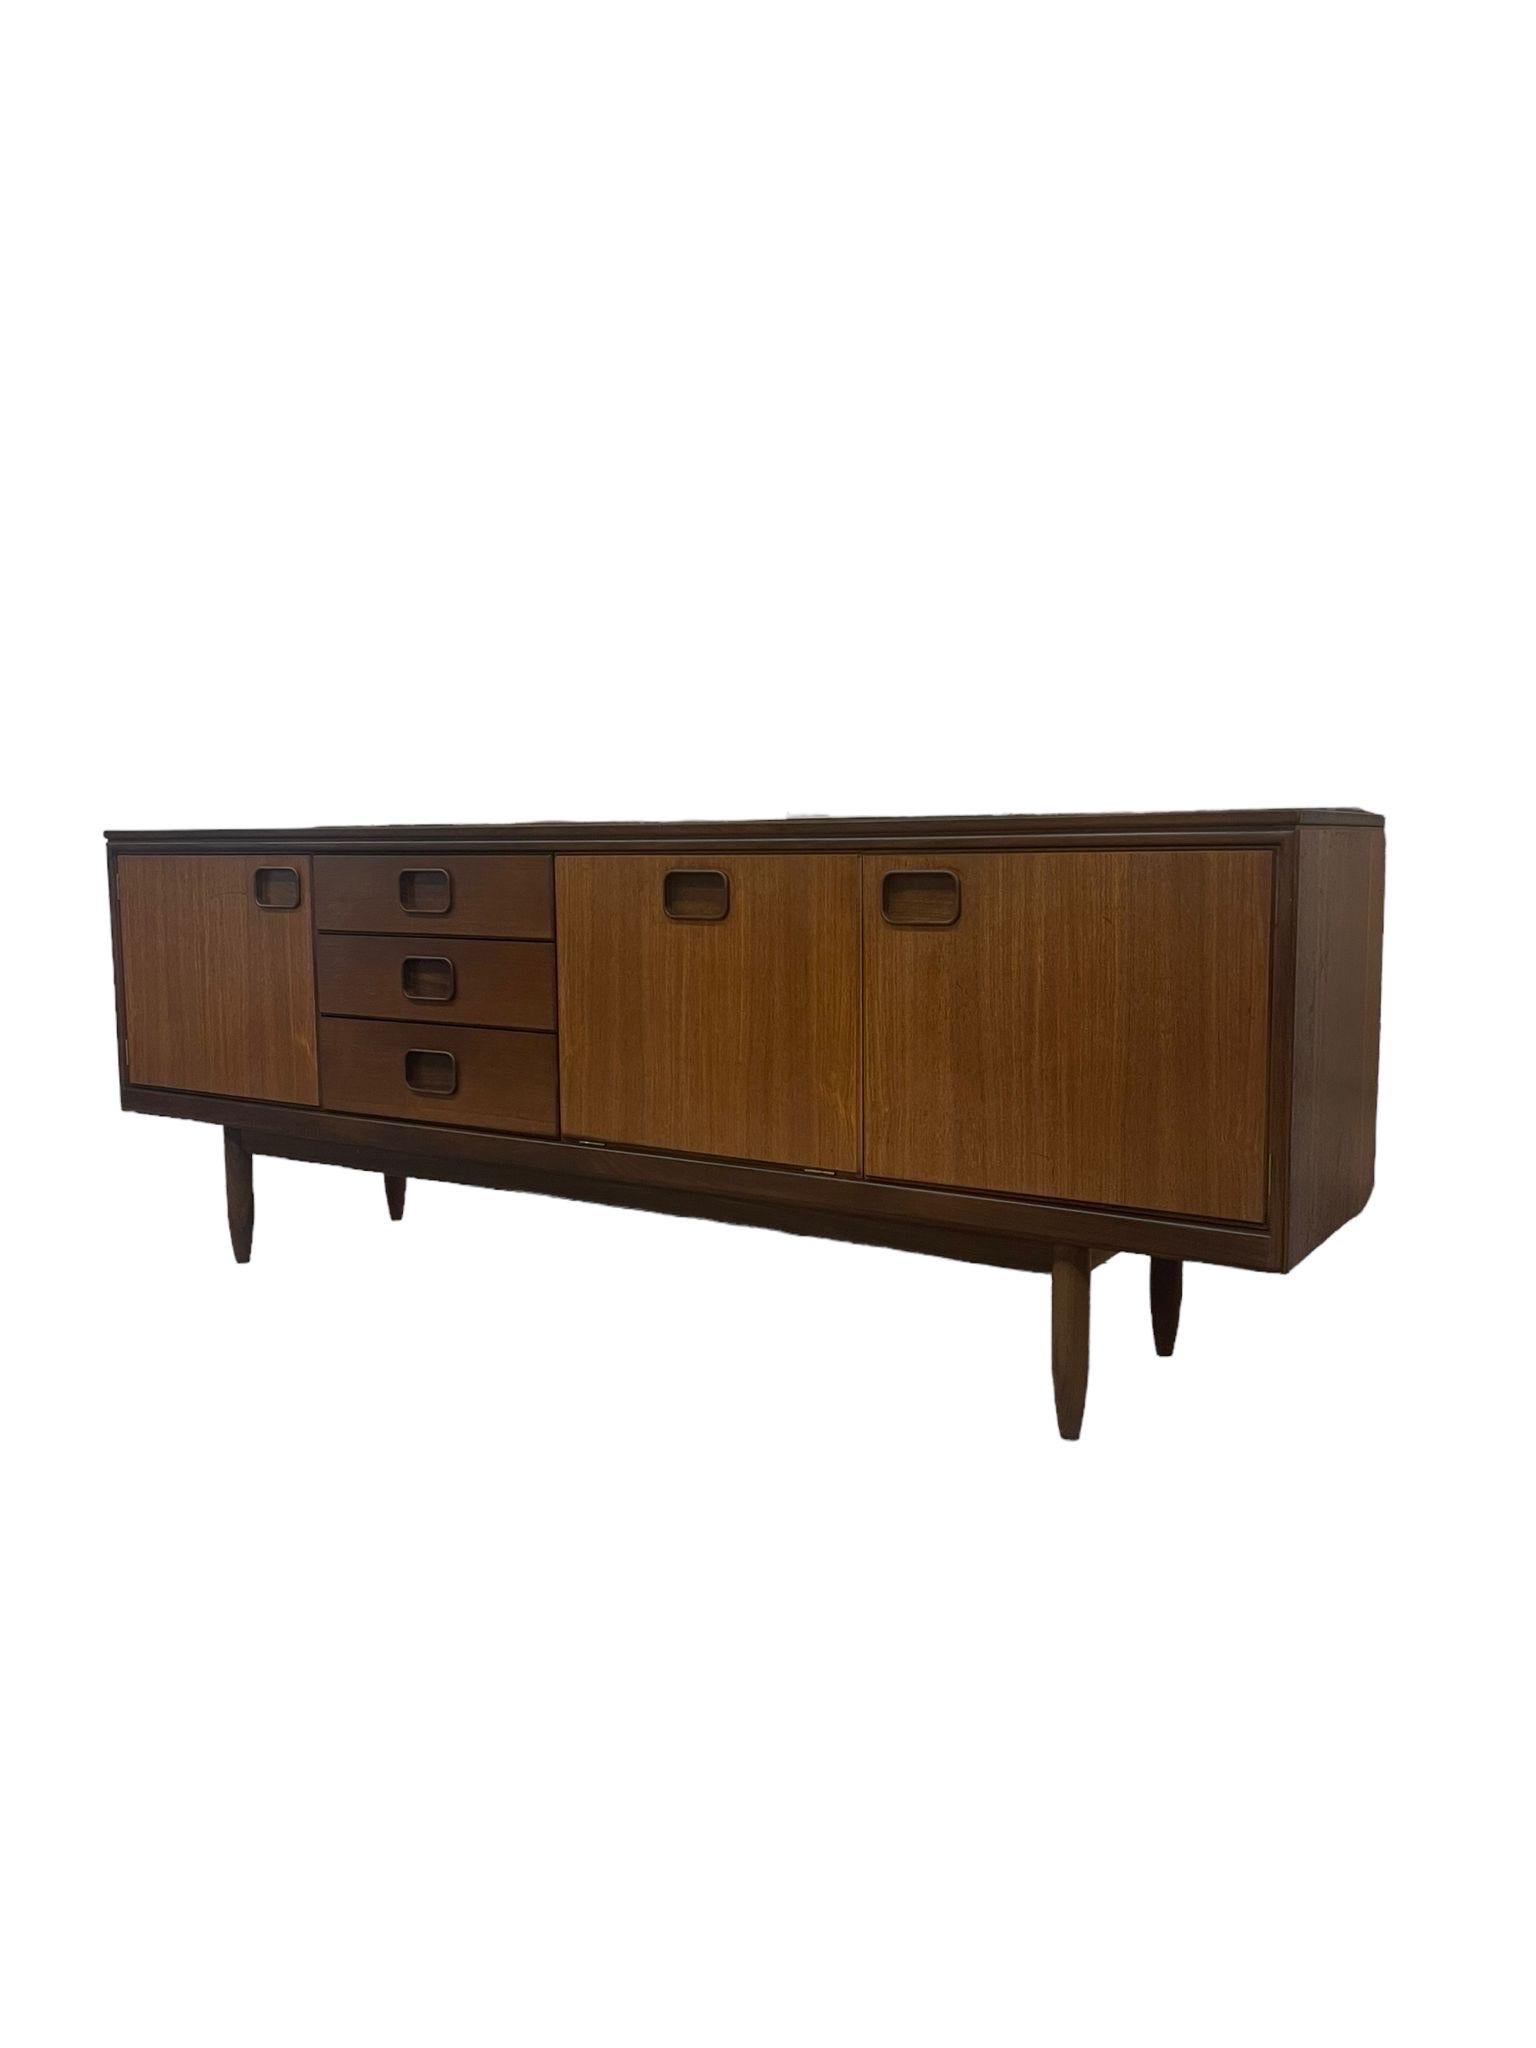 Possibly Teak Sideboard with Three Drawers and a Fall Front , Flanked by Two Cupboard Doors, Enclosing Shelves, Finished Back , Raised on Tapered Legs. Top Drawer is Felted with Dividers as Shown. English Designer. Imported From UK. No Makers Mark.